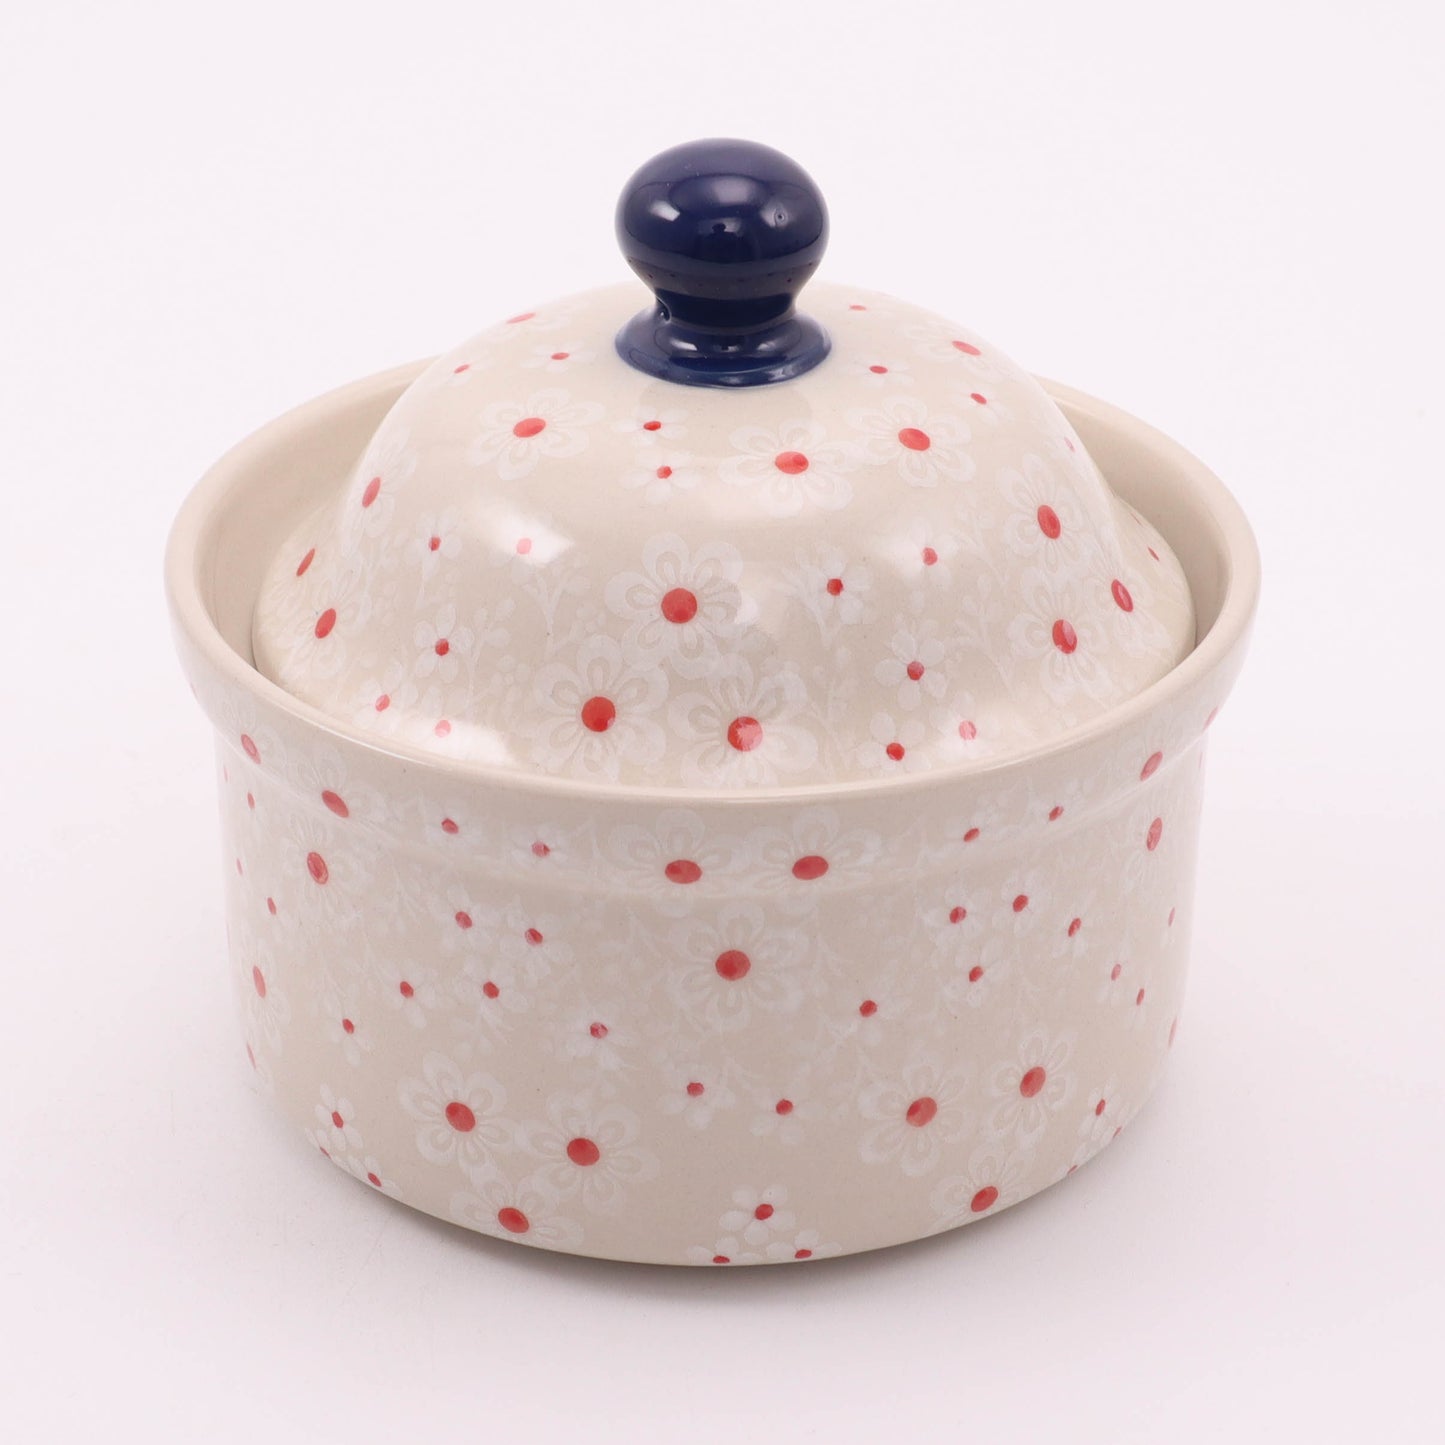 4"x5" Round Covered Dish. Pattern: Sugar and Spice